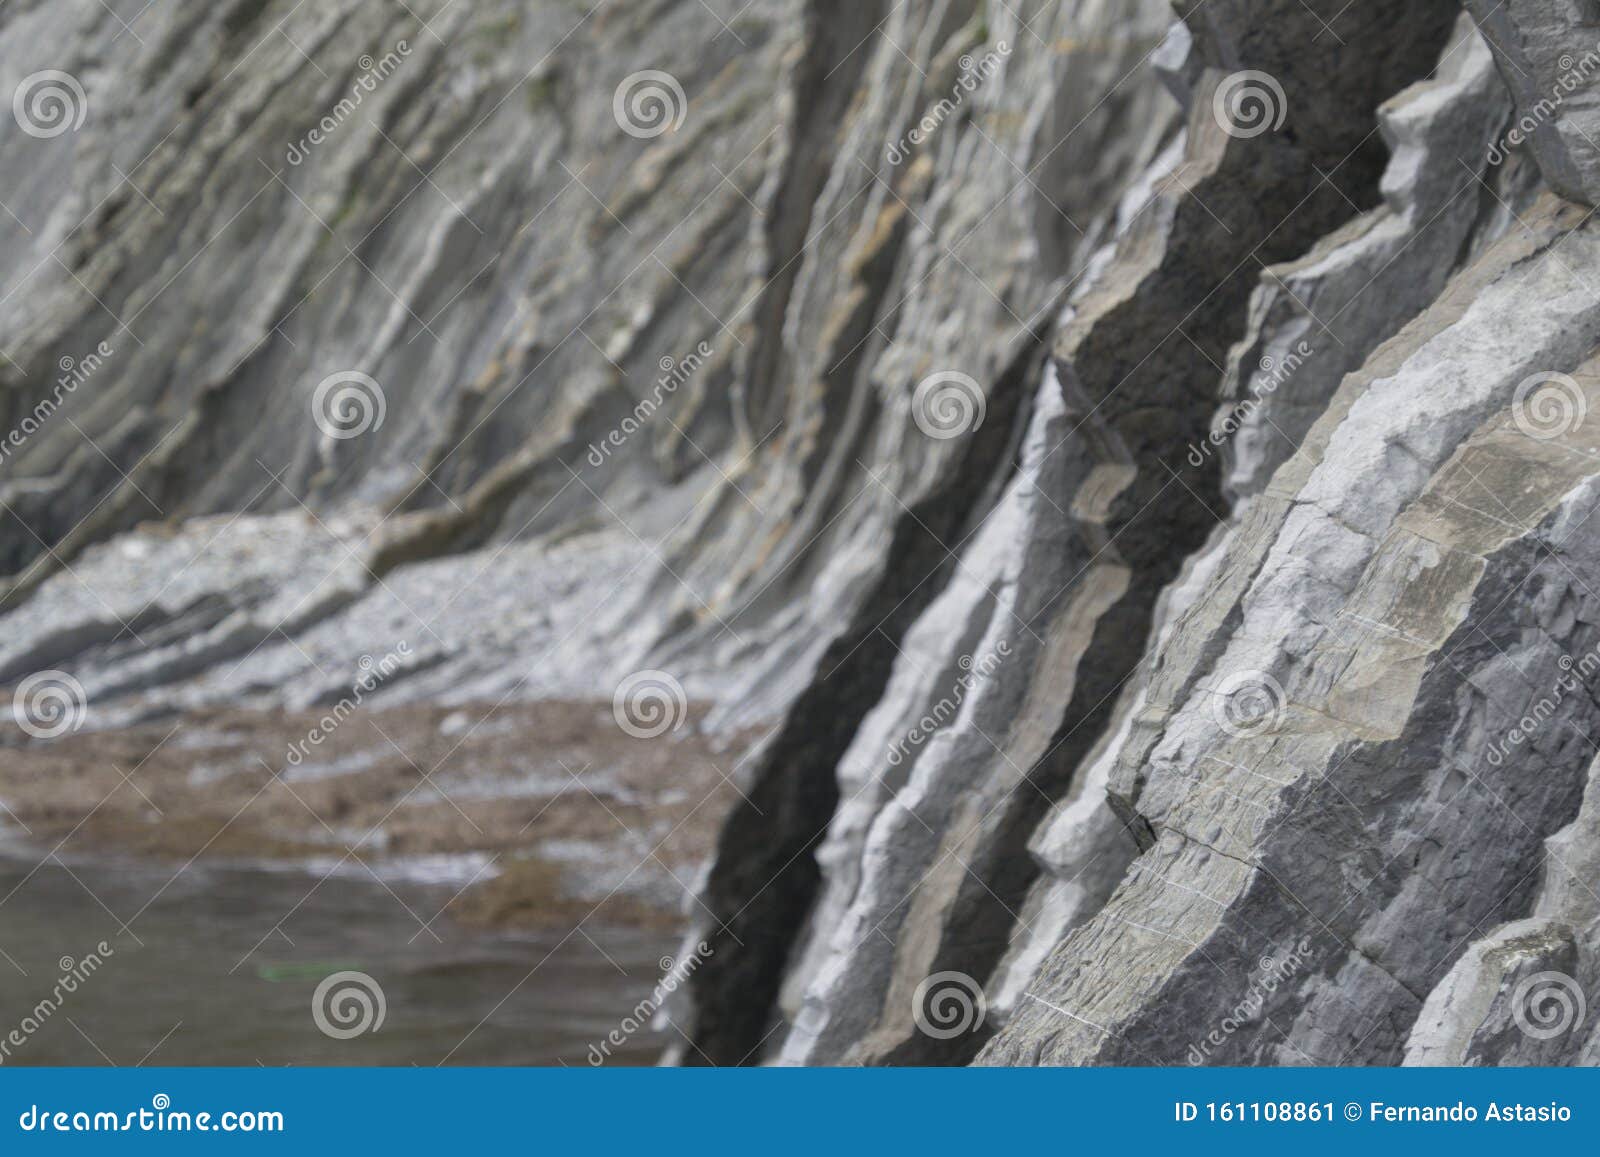 the flickr of the zumaia